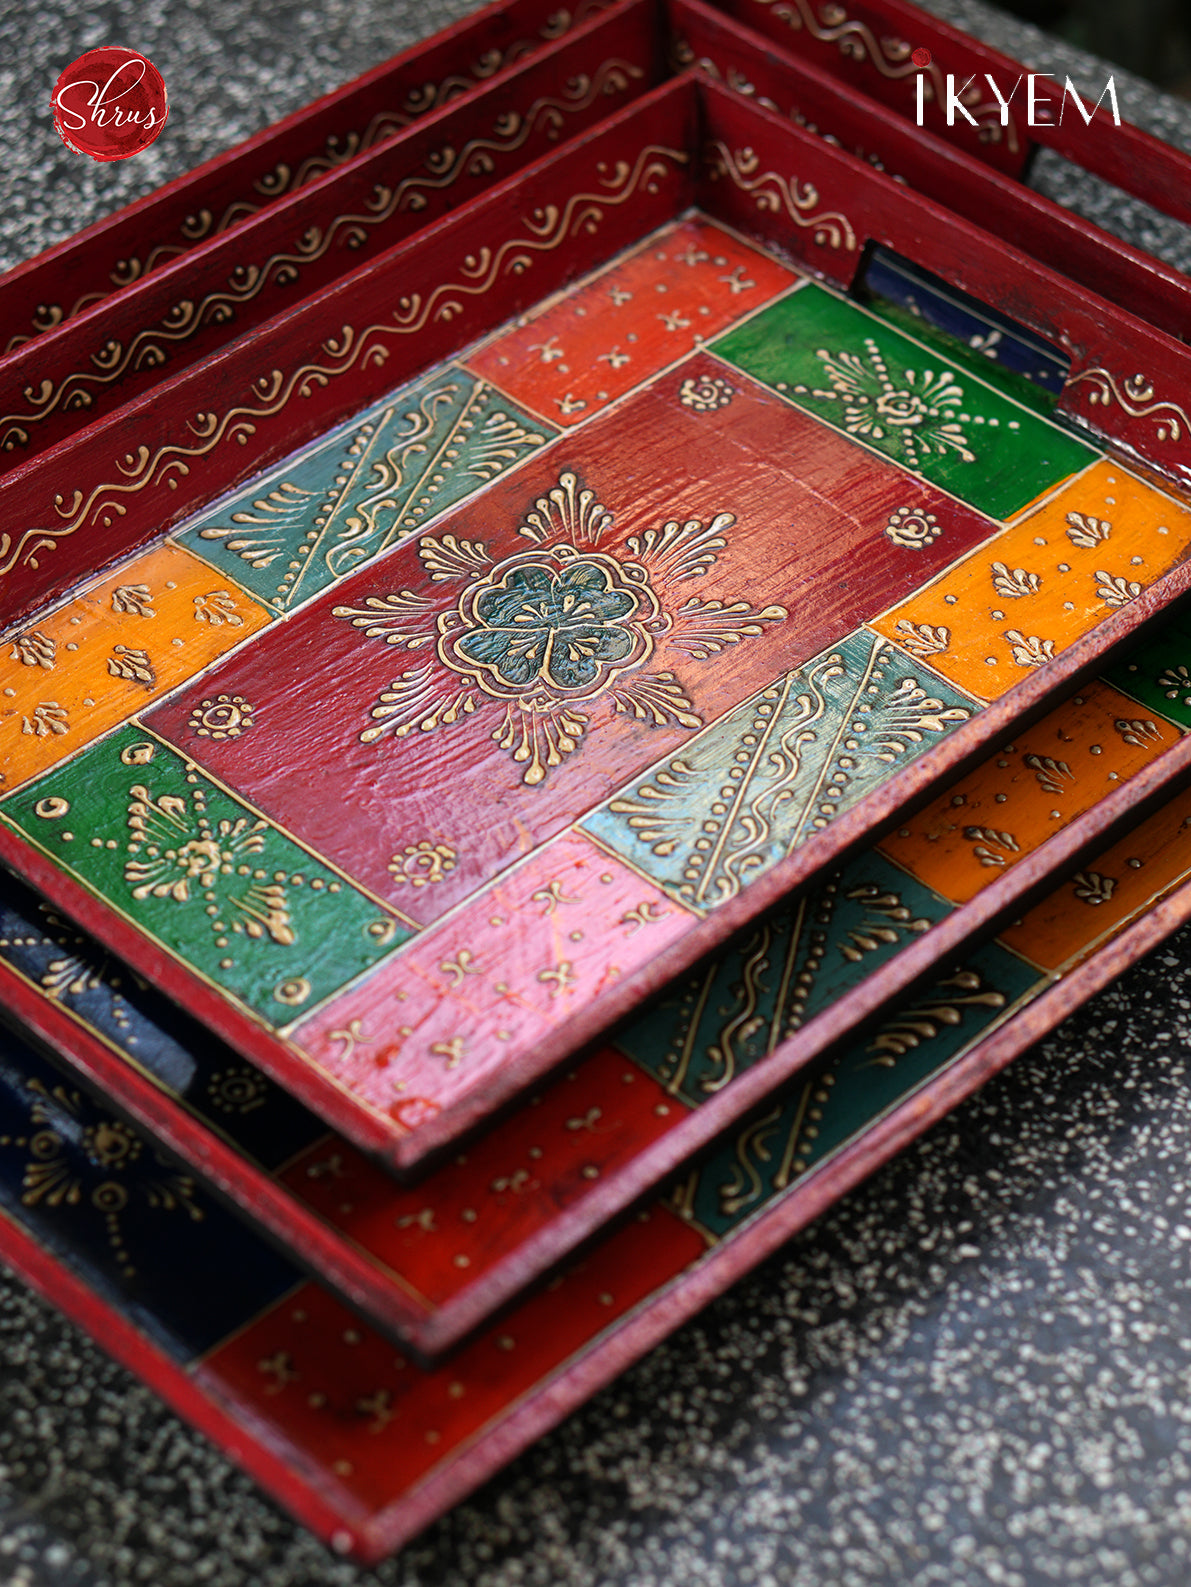 Handpainted wooden trays